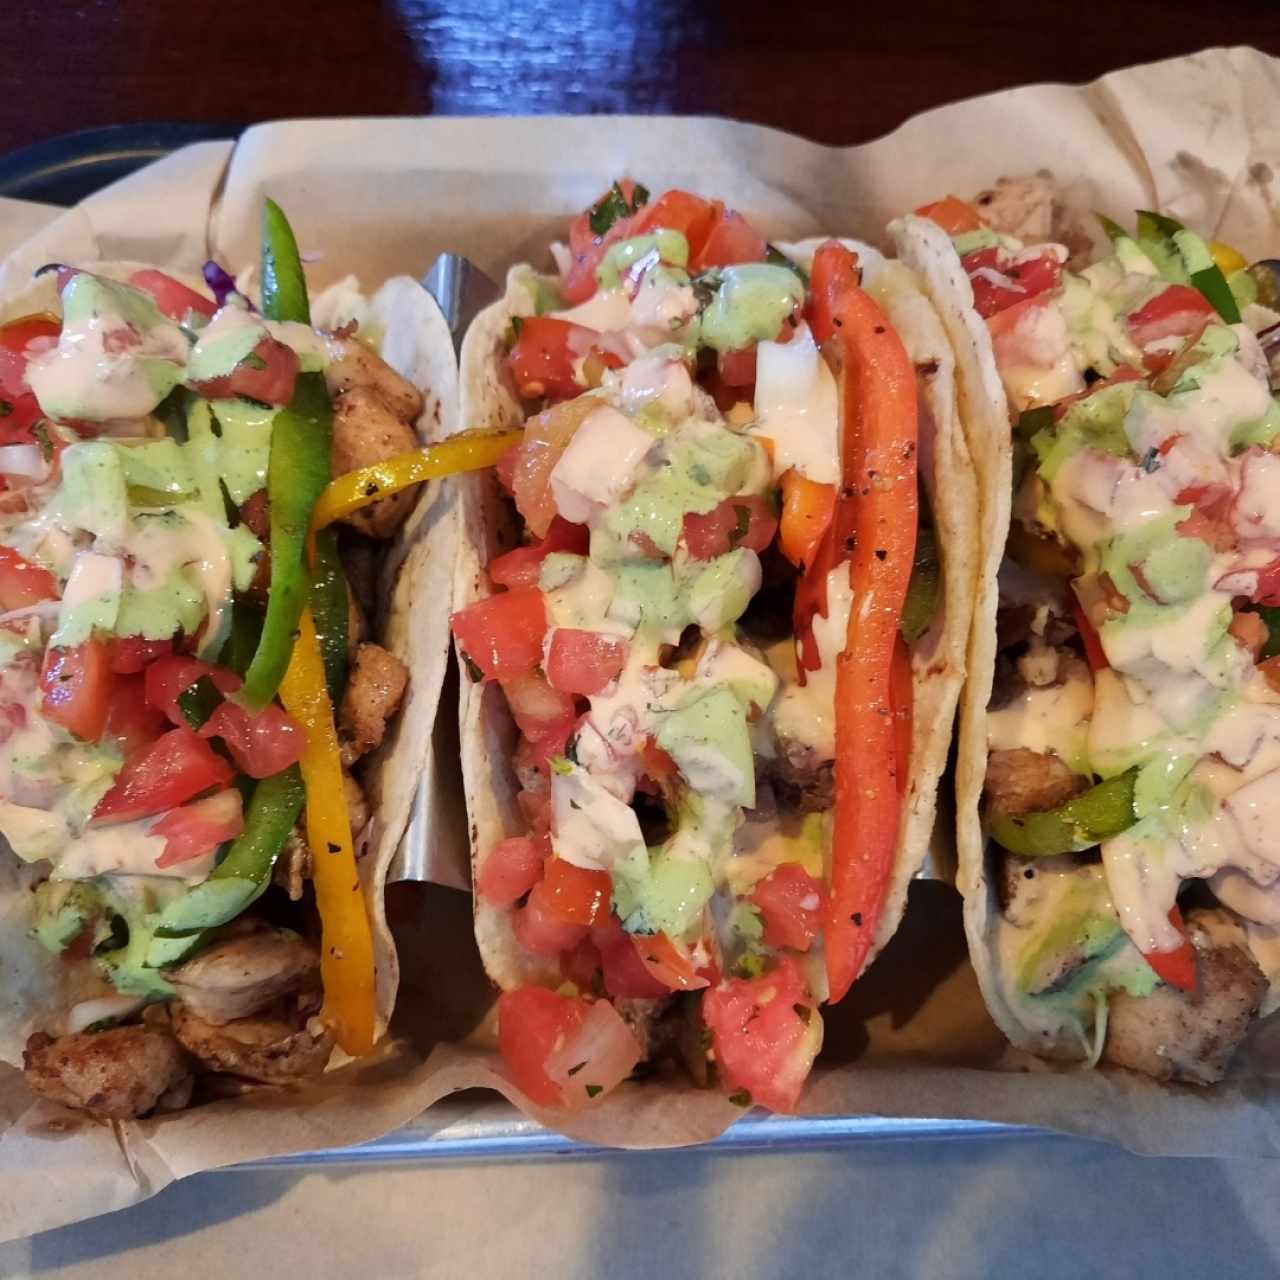 Three tacos (two fish and one chicken)